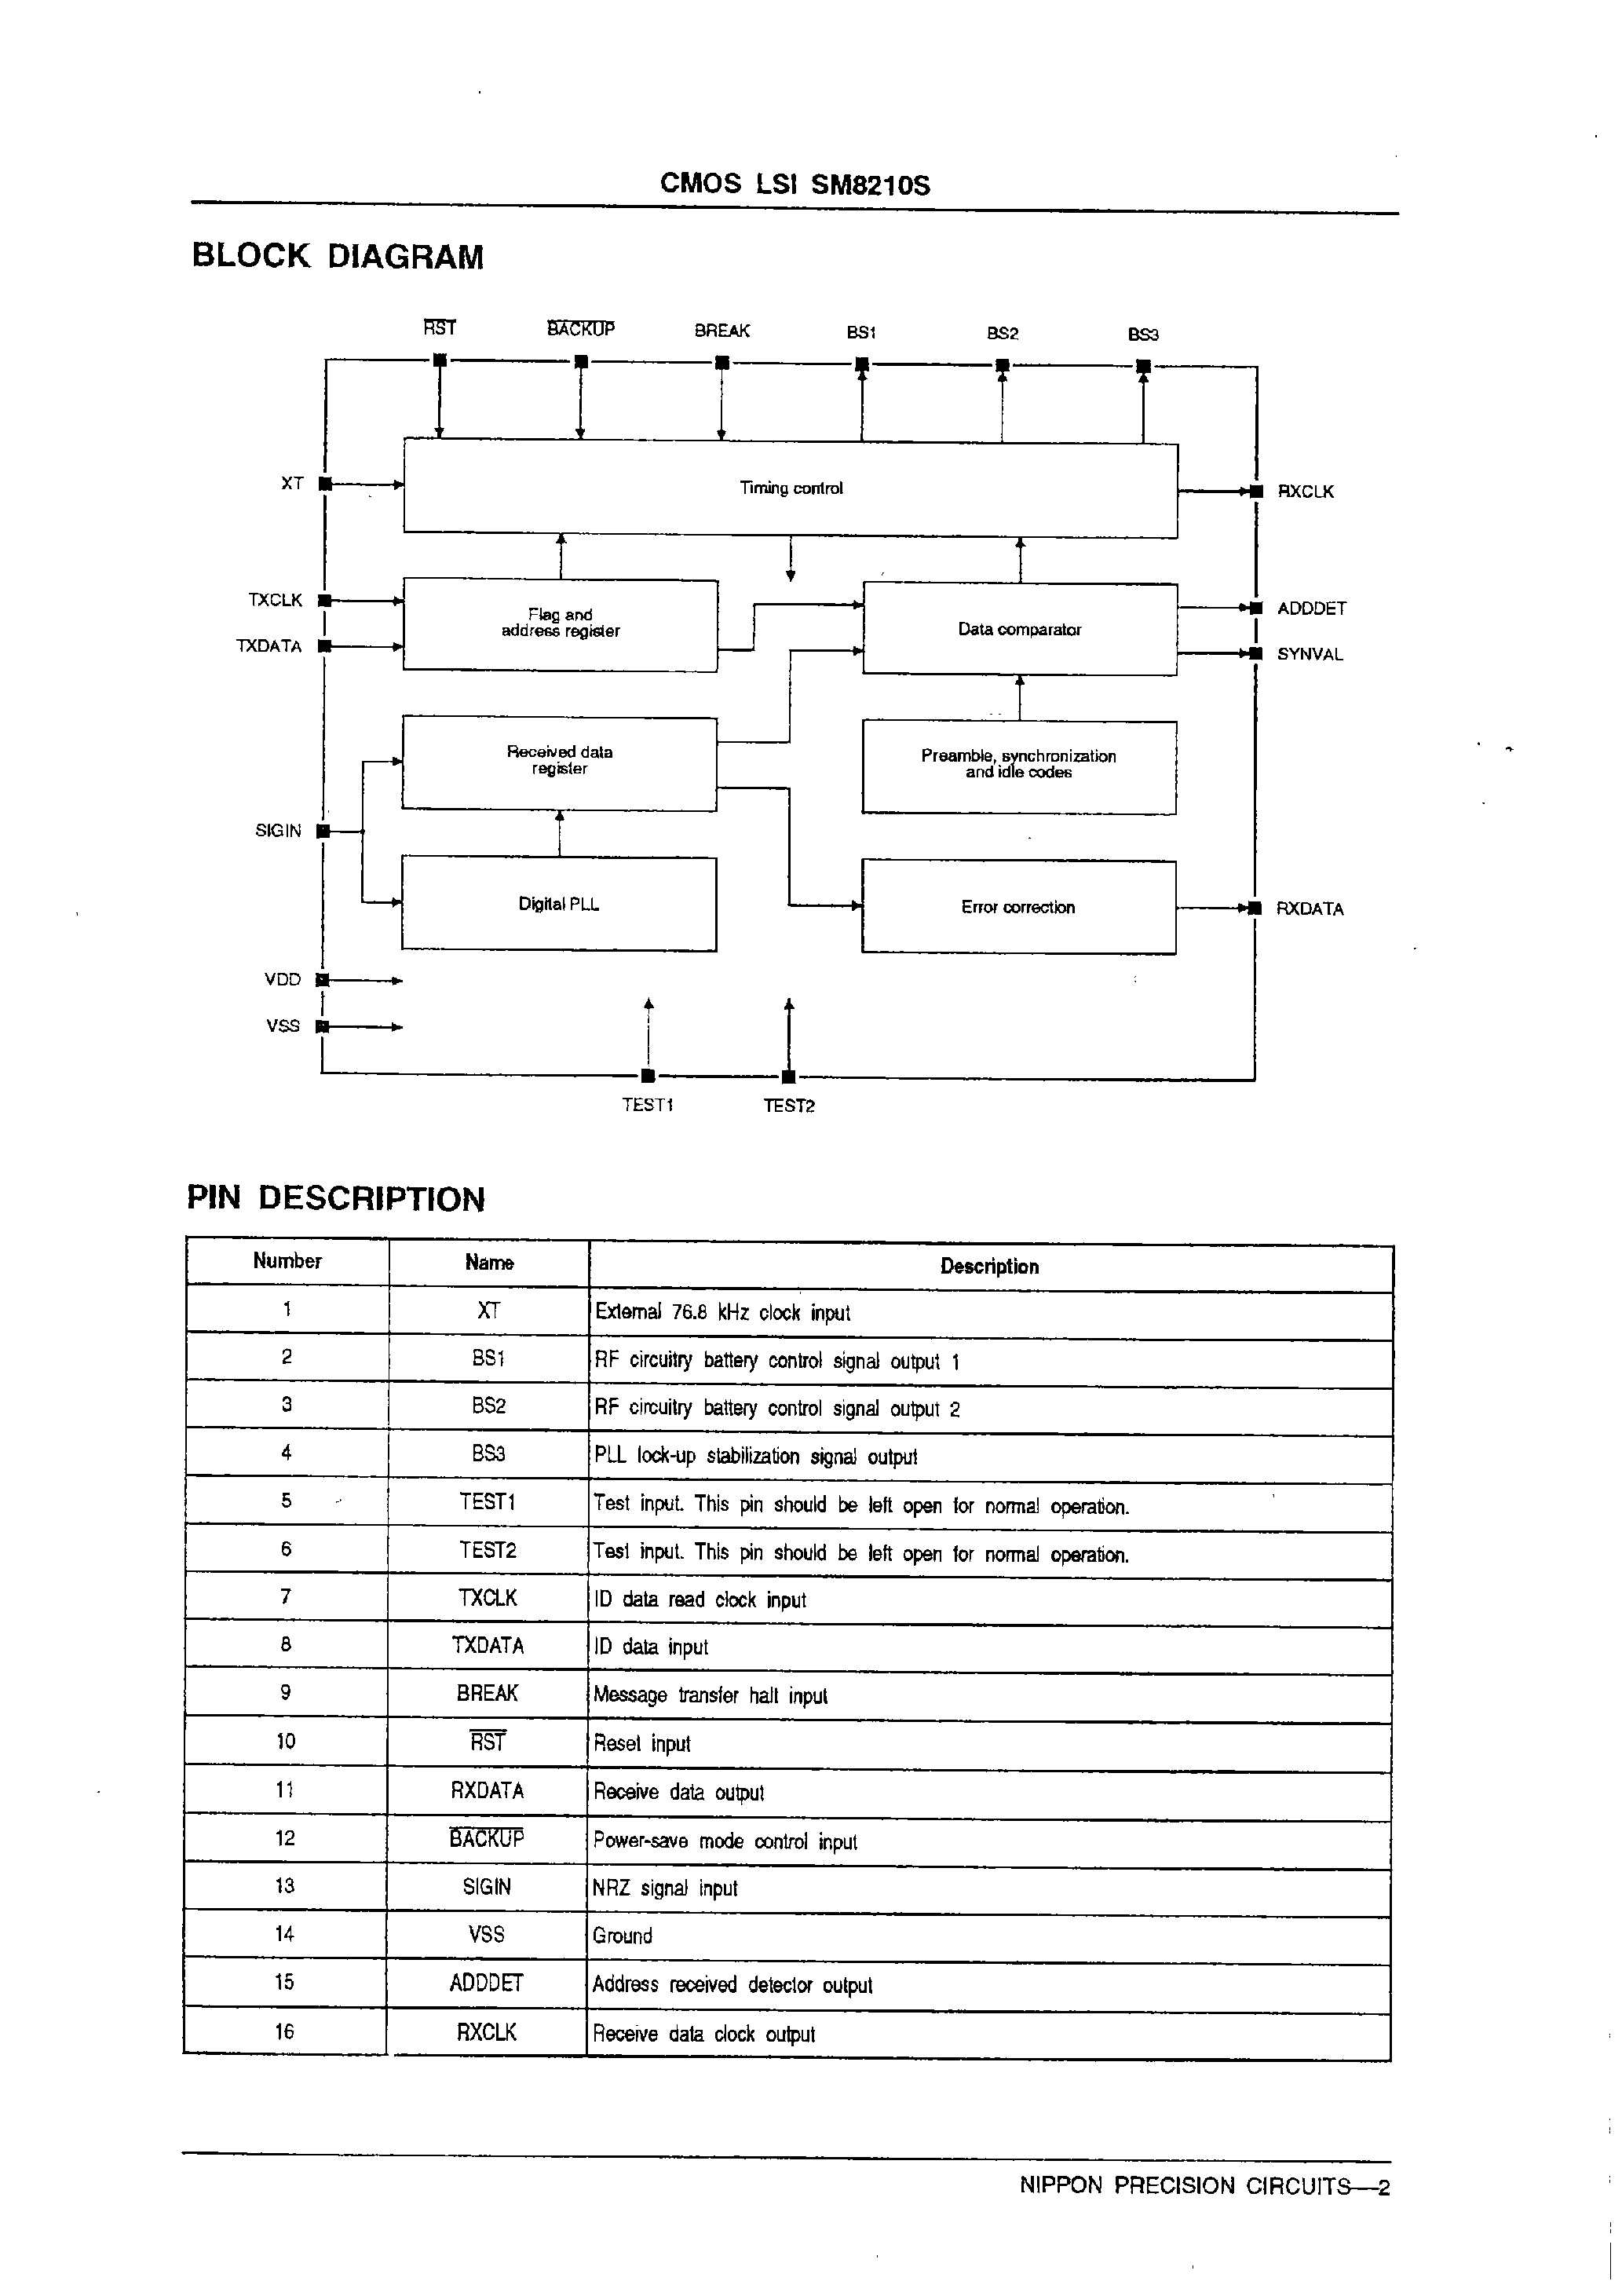 Datasheet SM8210 - Signal Processor for Paging Receivers page 2